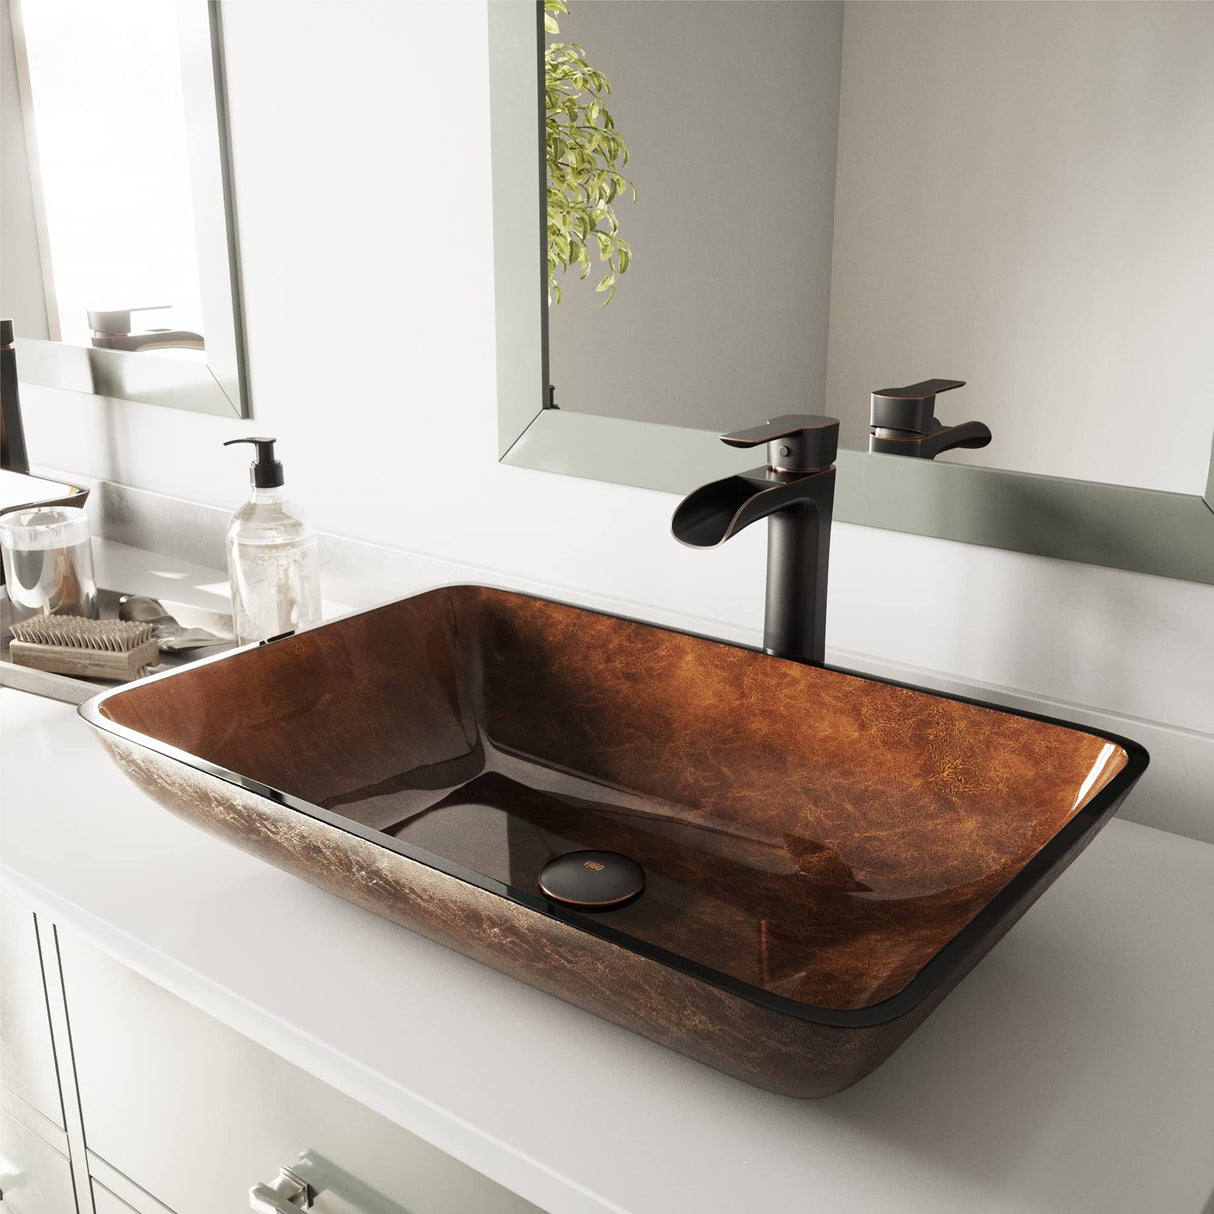 VIGO 2.75" Diameter Vessel Bathroom Sink Pop-Up Drain and Mounting Ring Without Overflow in Antique Rubbed Bronze Finish